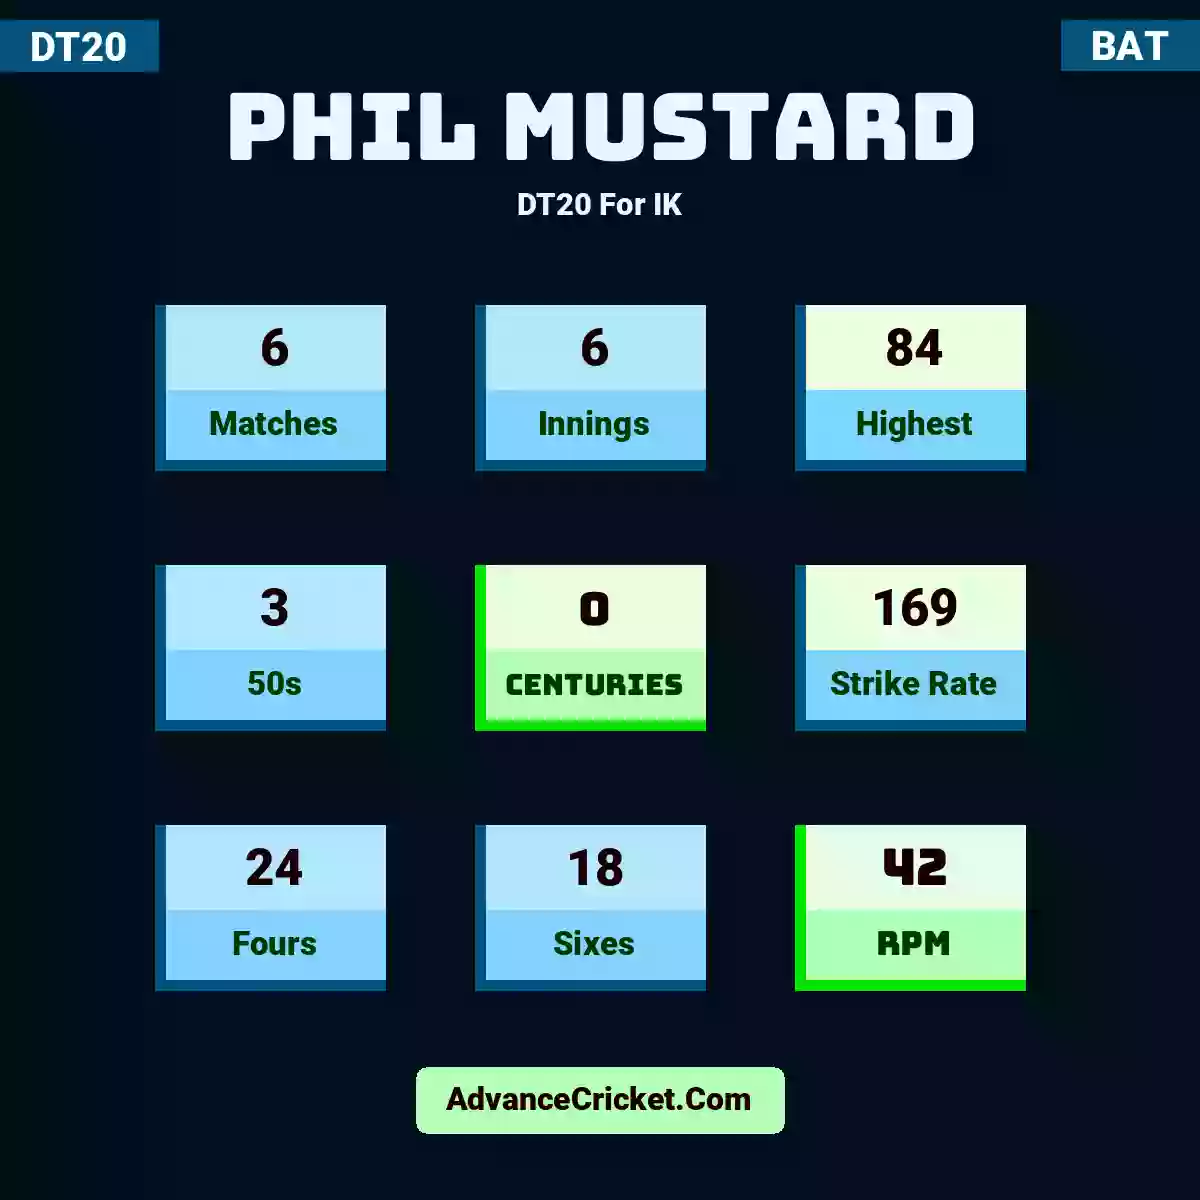 Phil Mustard DT20  For IK, Phil Mustard played 6 matches, scored 84 runs as highest, 3 half-centuries, and 0 centuries, with a strike rate of 169. P.Mustard hit 24 fours and 18 sixes, with an RPM of 42.